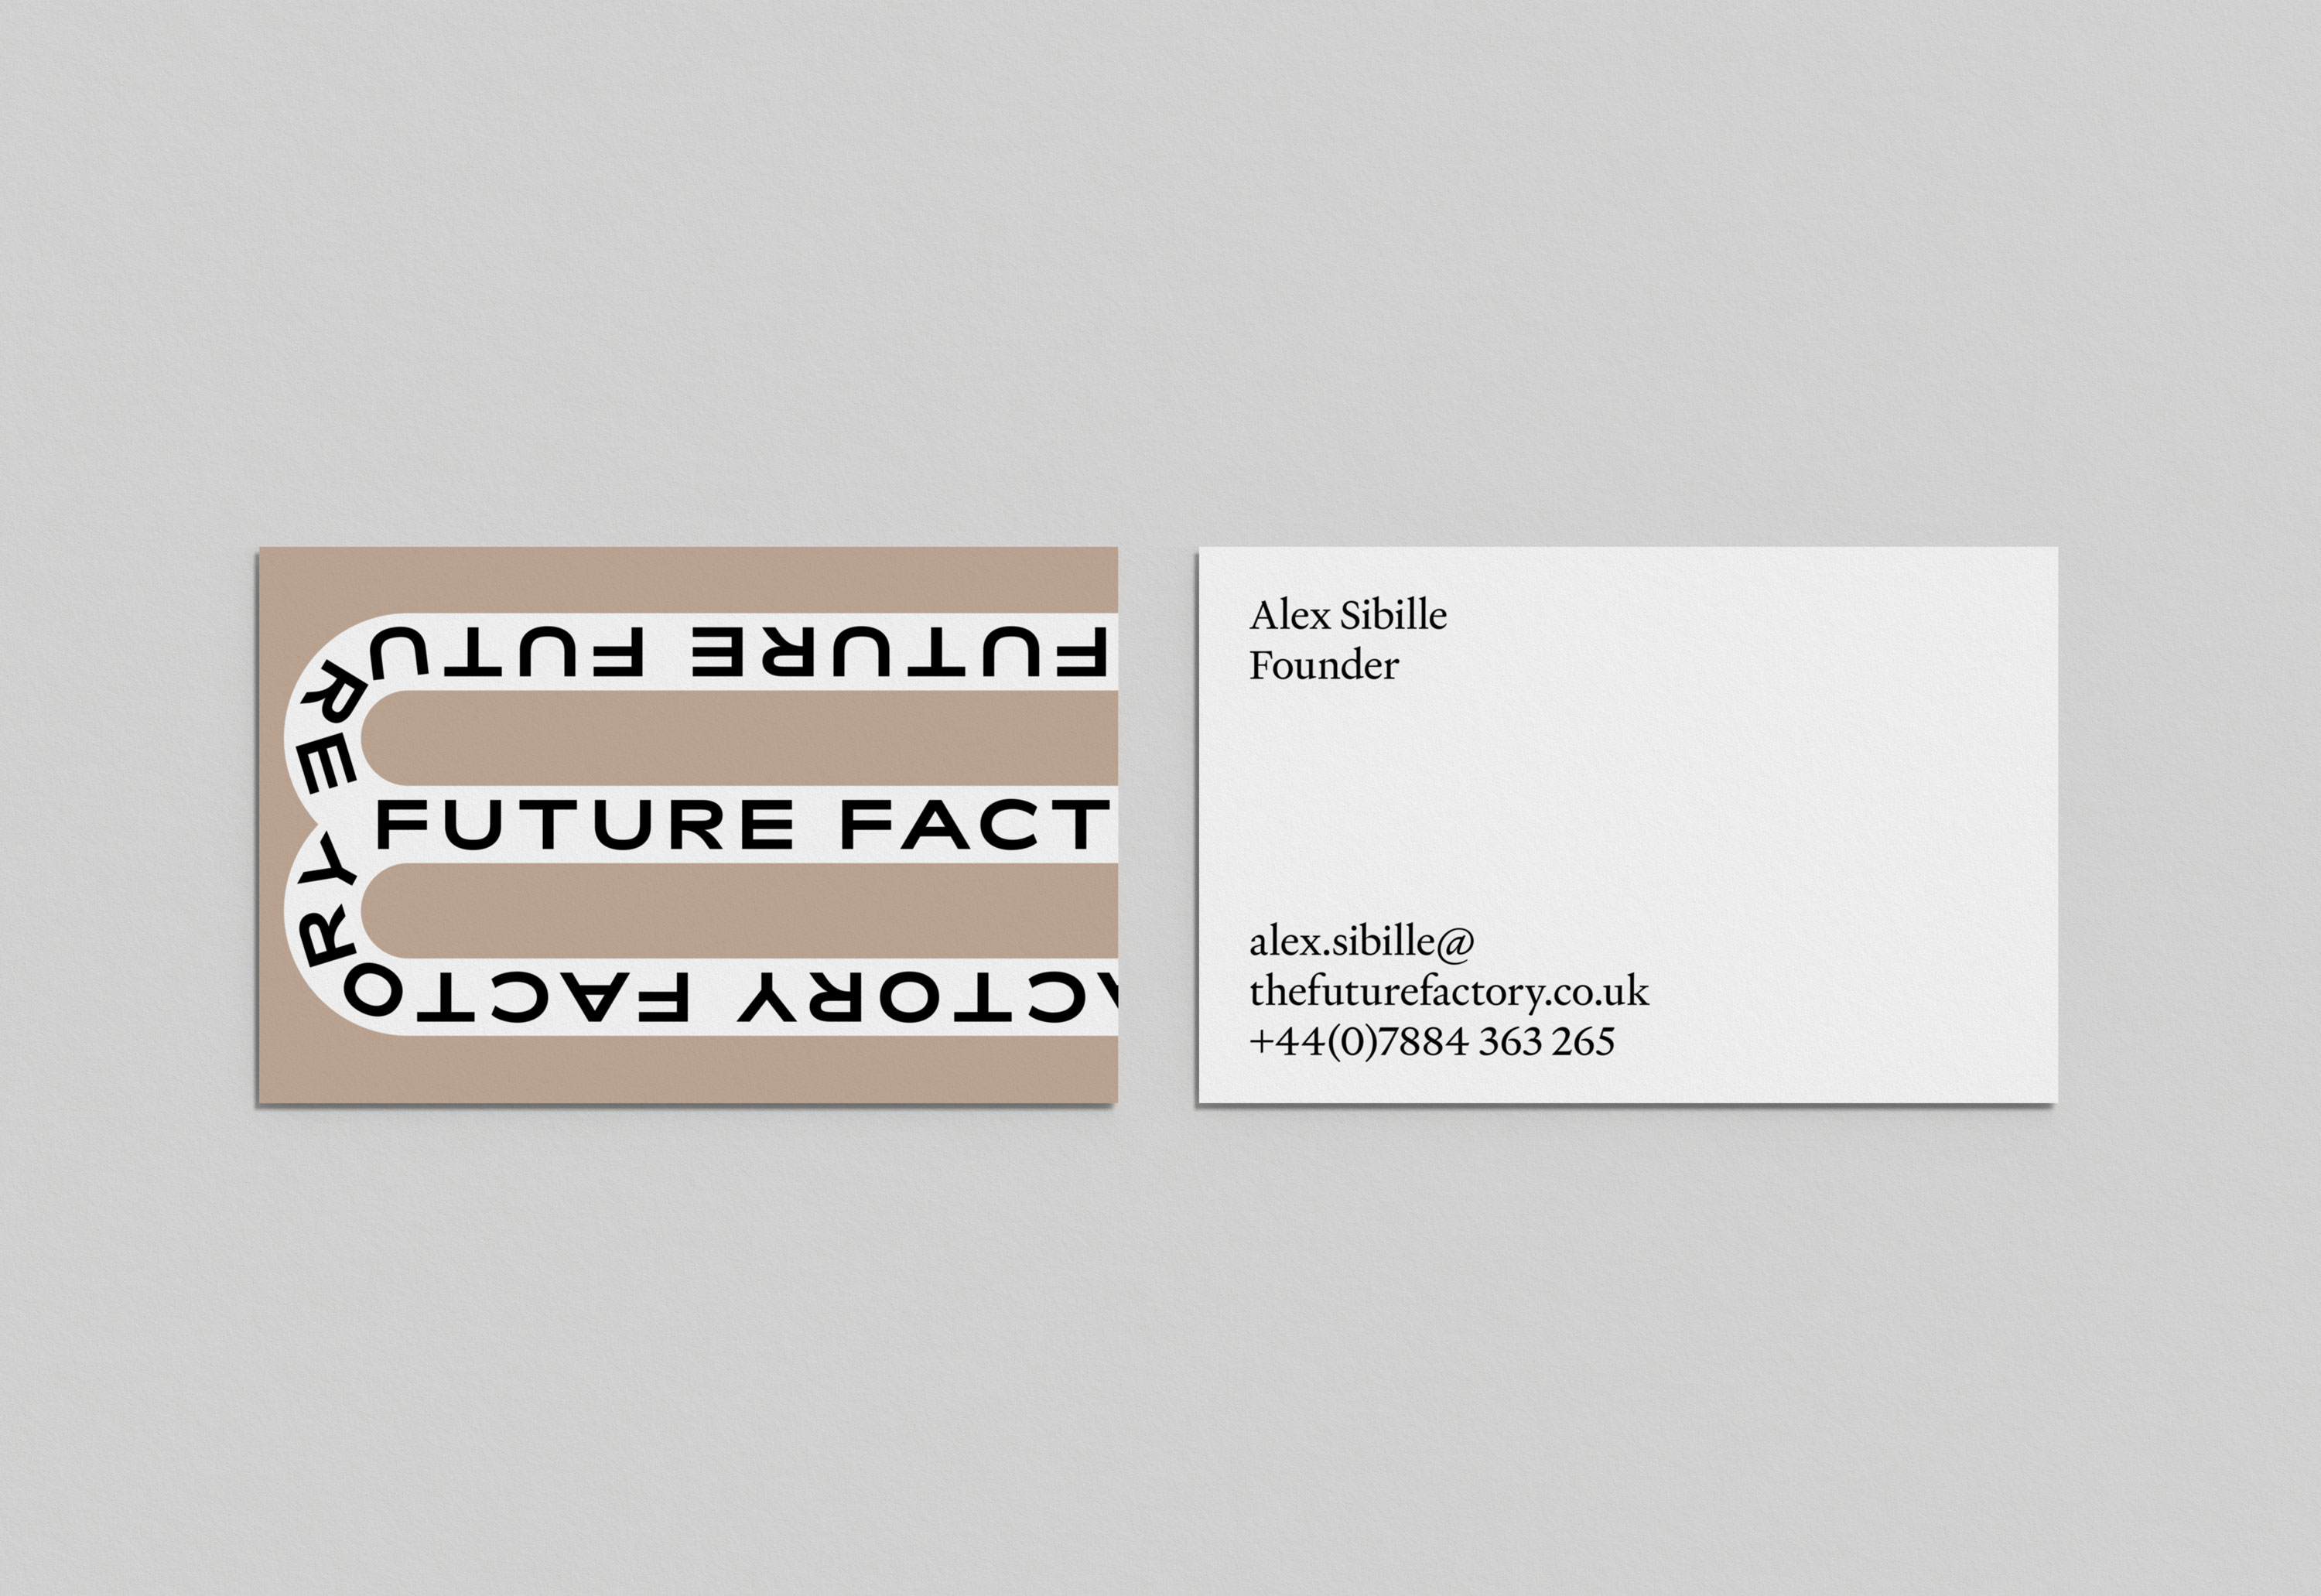 Brand identity, motion graphics and website by Dutchscot for London-based pipeline business Future Factory